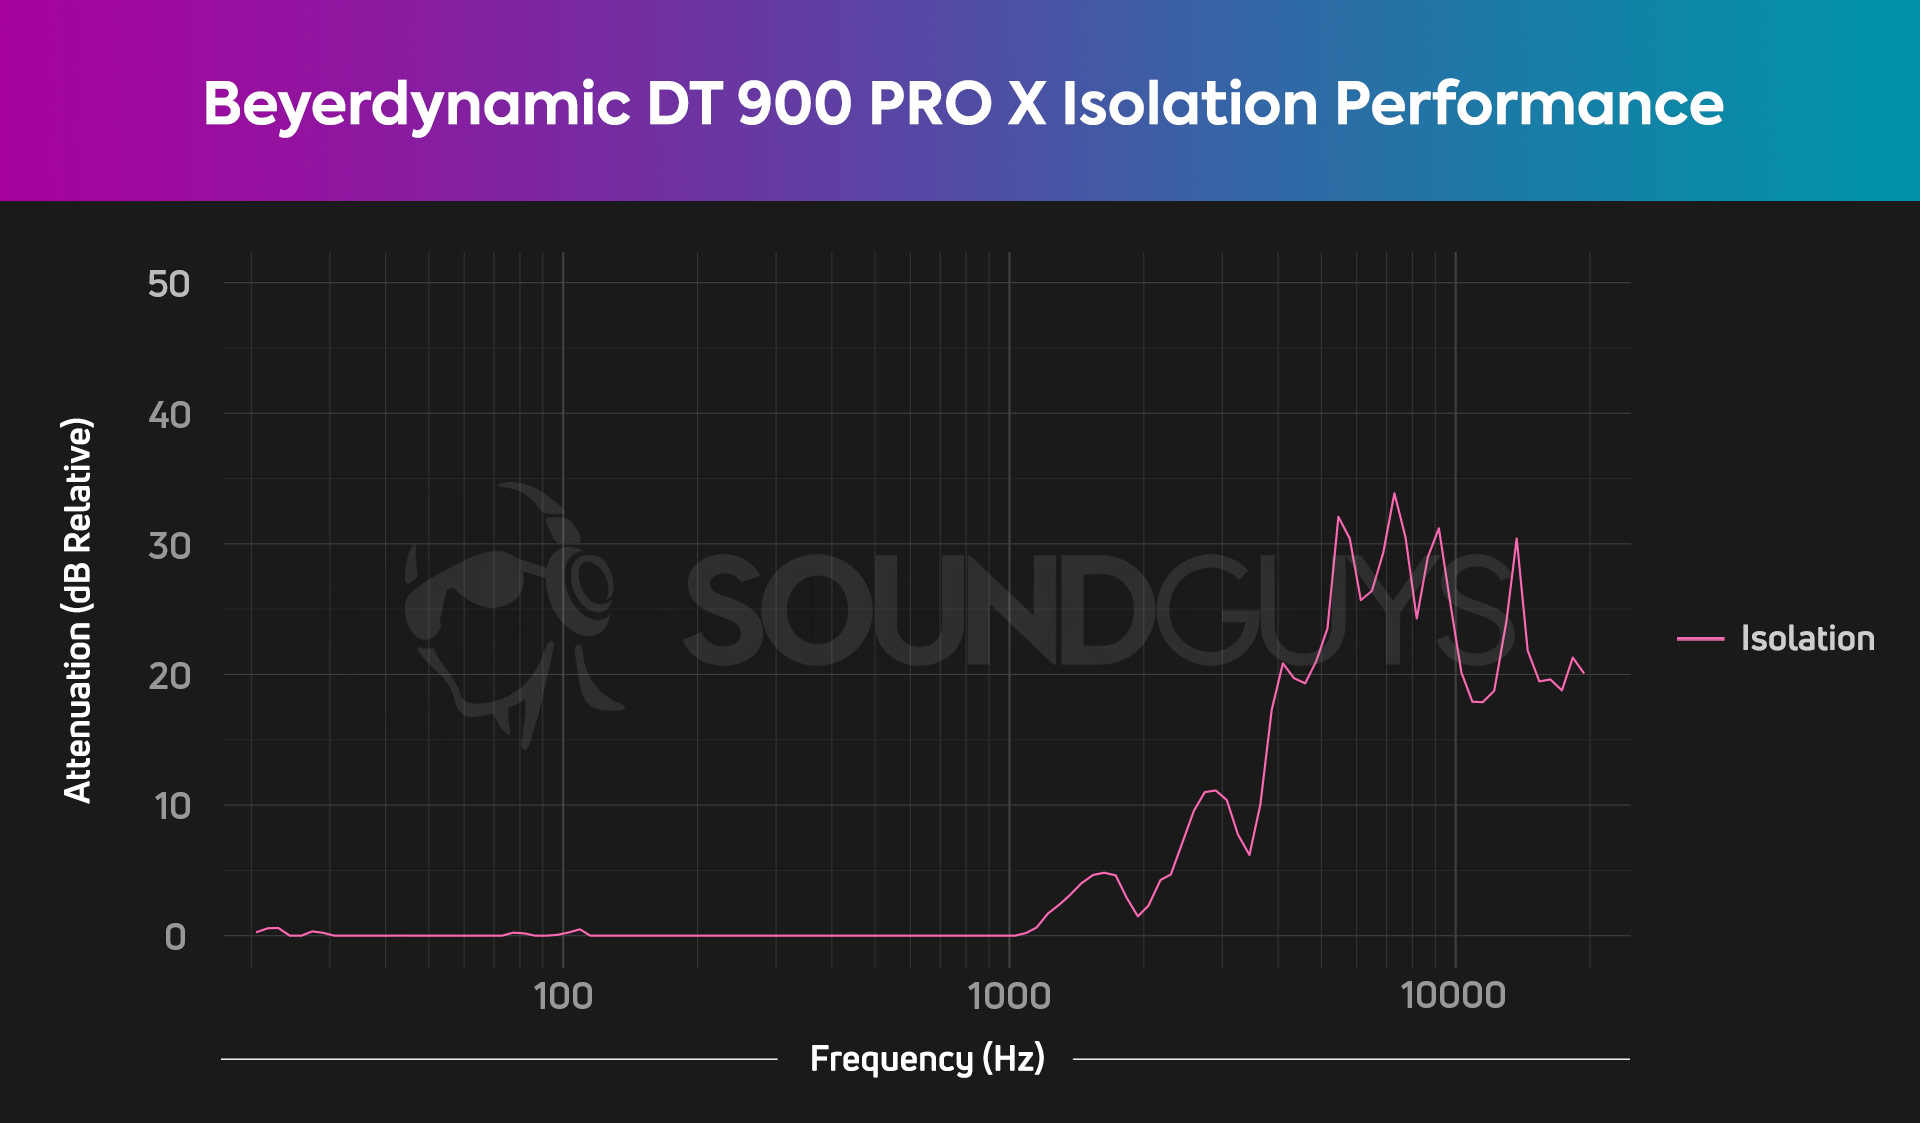 An isolation chart for the Beyerdynamic DT 900 PRO X open-back headset shows that virtually all noise makes it through the headset.